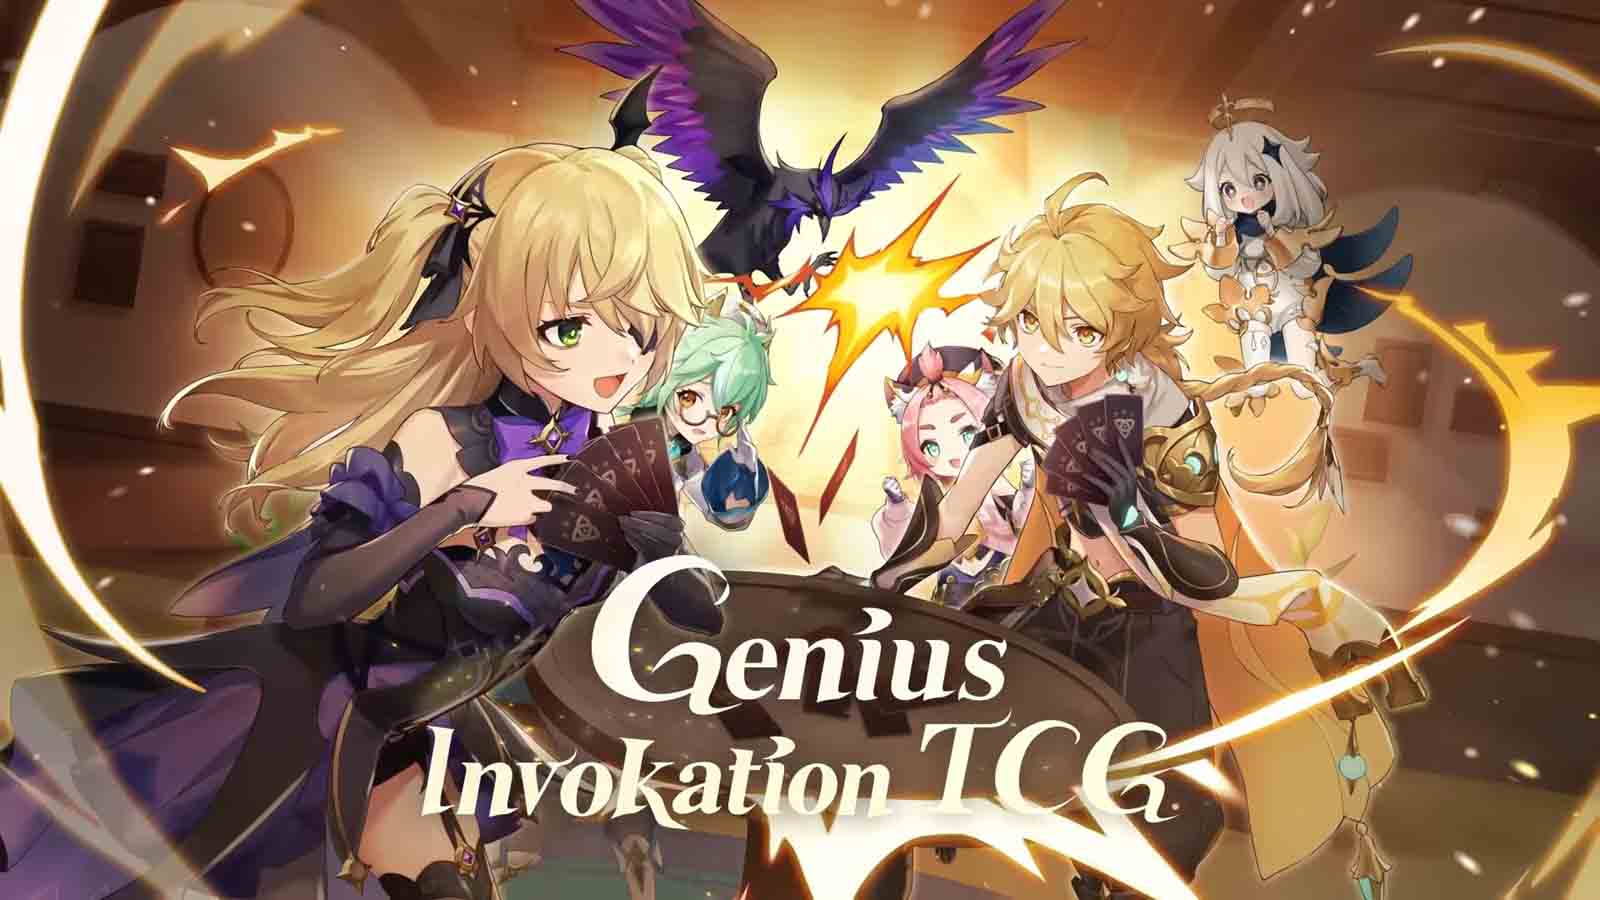 Genshin Impact News on X: New End-Game Content Mode- Genius Invokation TCG  A Card battle game often mentioned in Itto and Ayato's voicelines. #原神  #GenshinImpact  / X